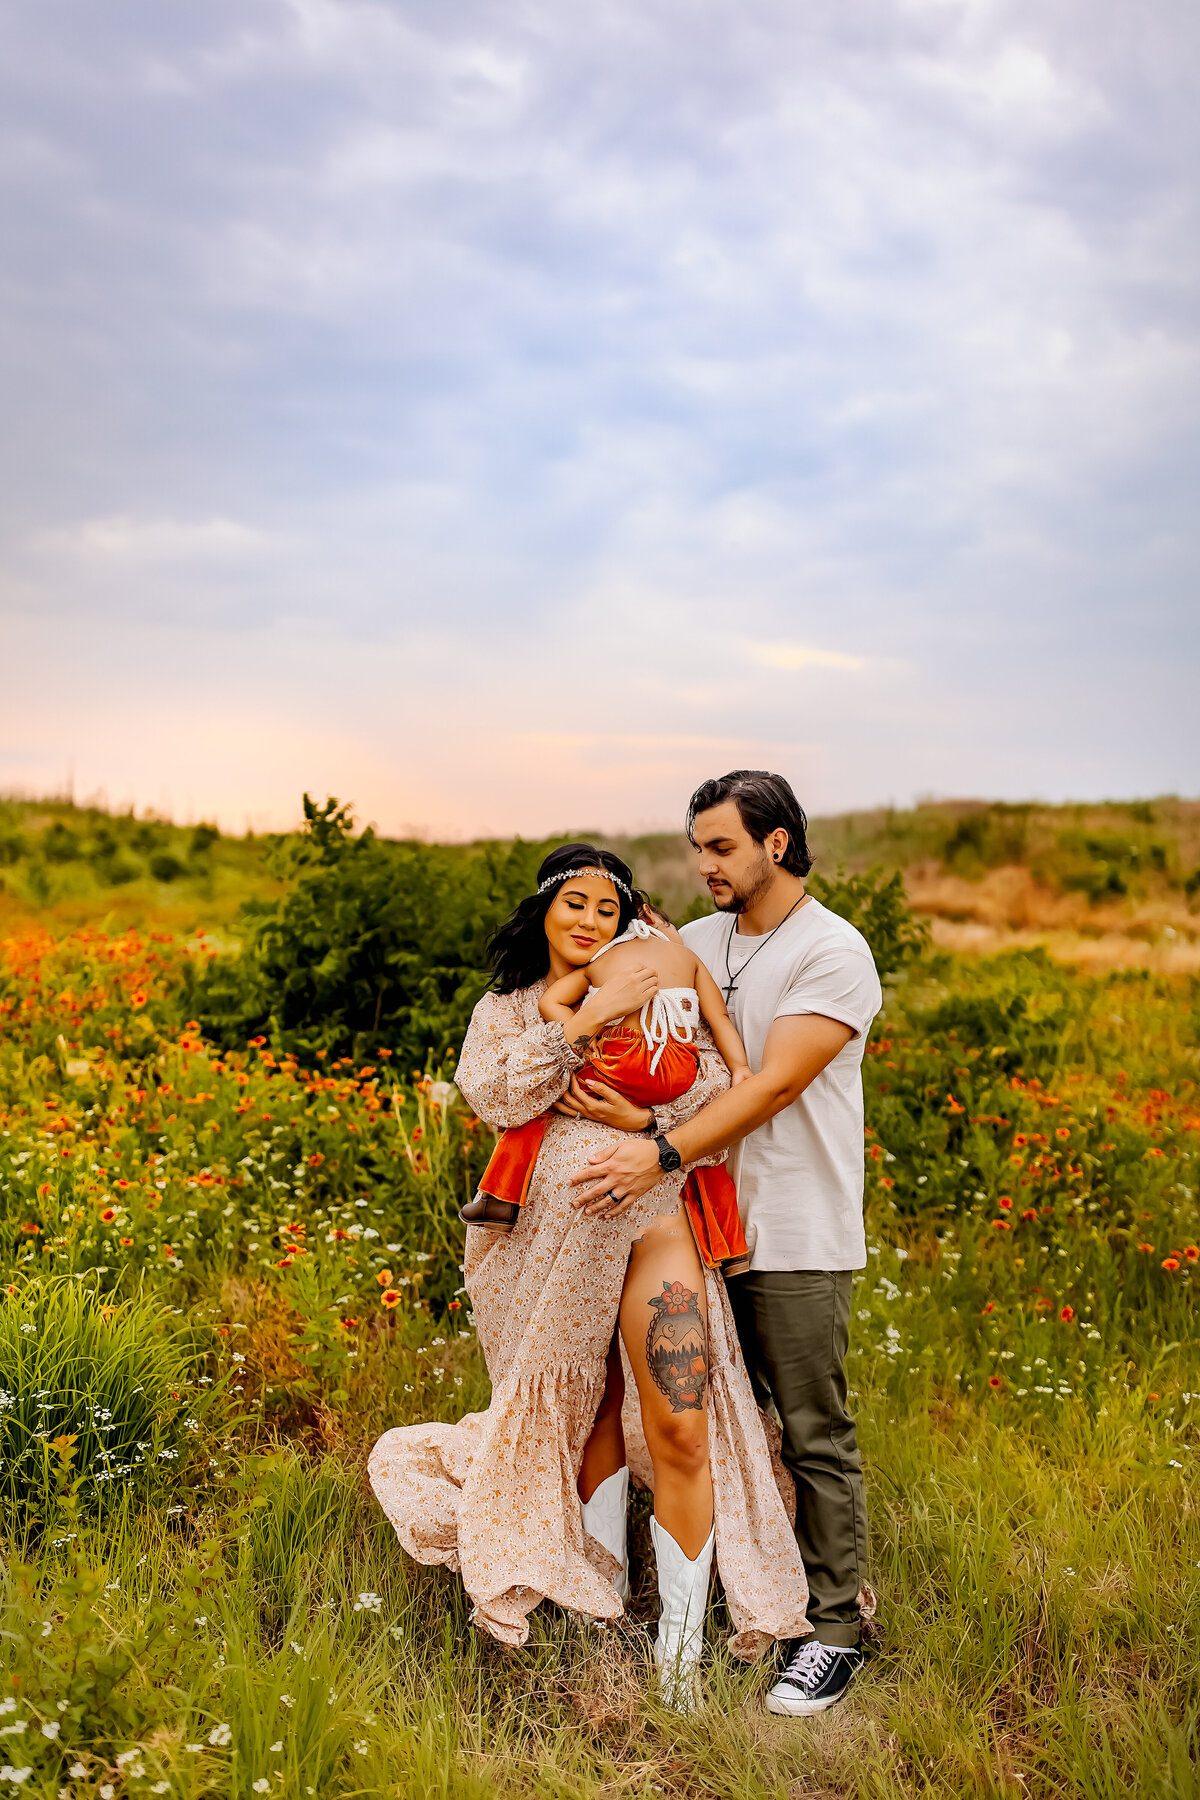 Maternity Session in Plano, Texas | Burleson, Texas Family and Newborn Photographer